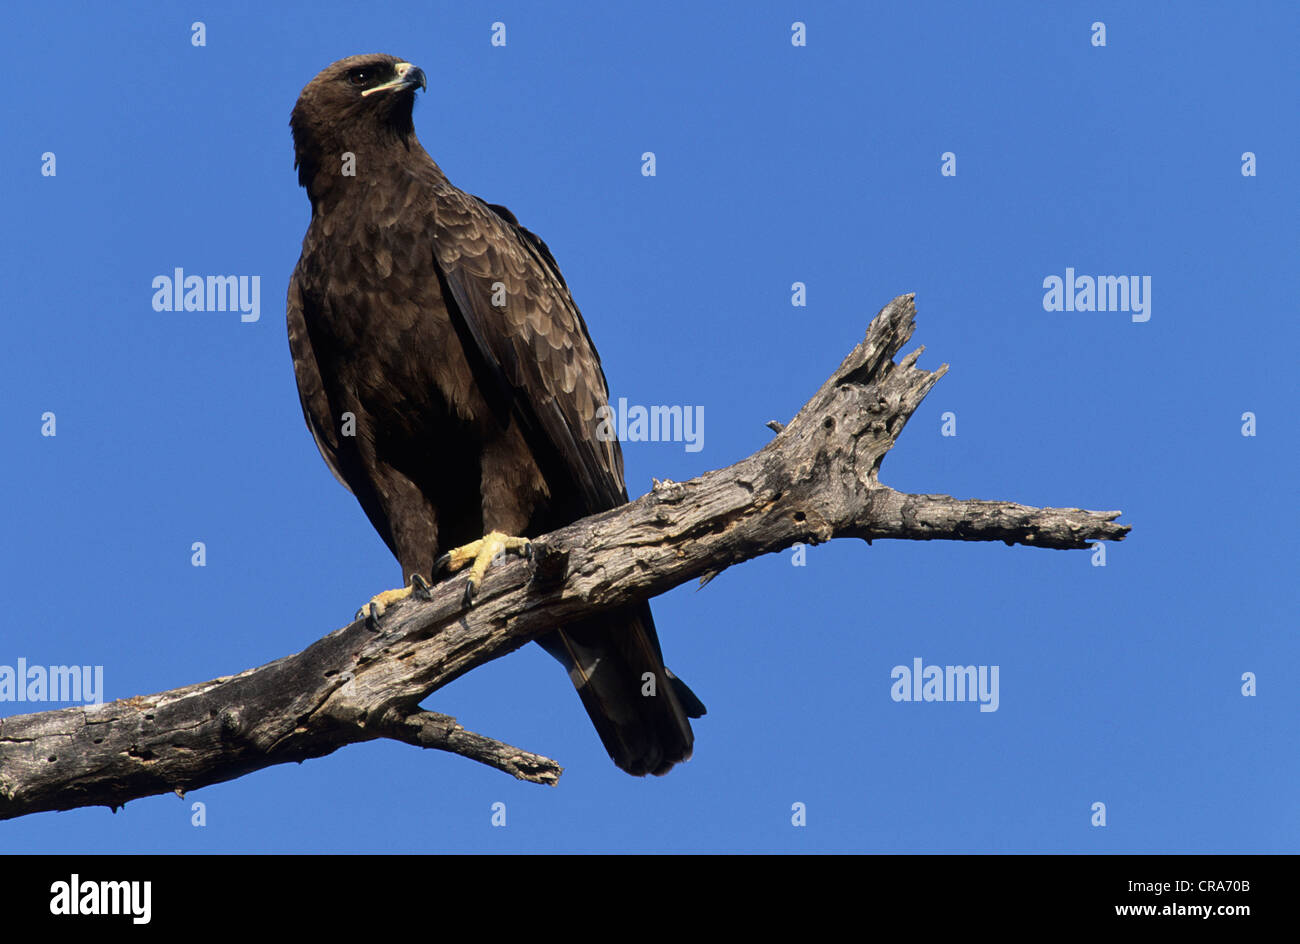 Wahlberg's Eagle (Aquila wahlbergi), Kruger National Park, South Africa, Africa Stock Photo